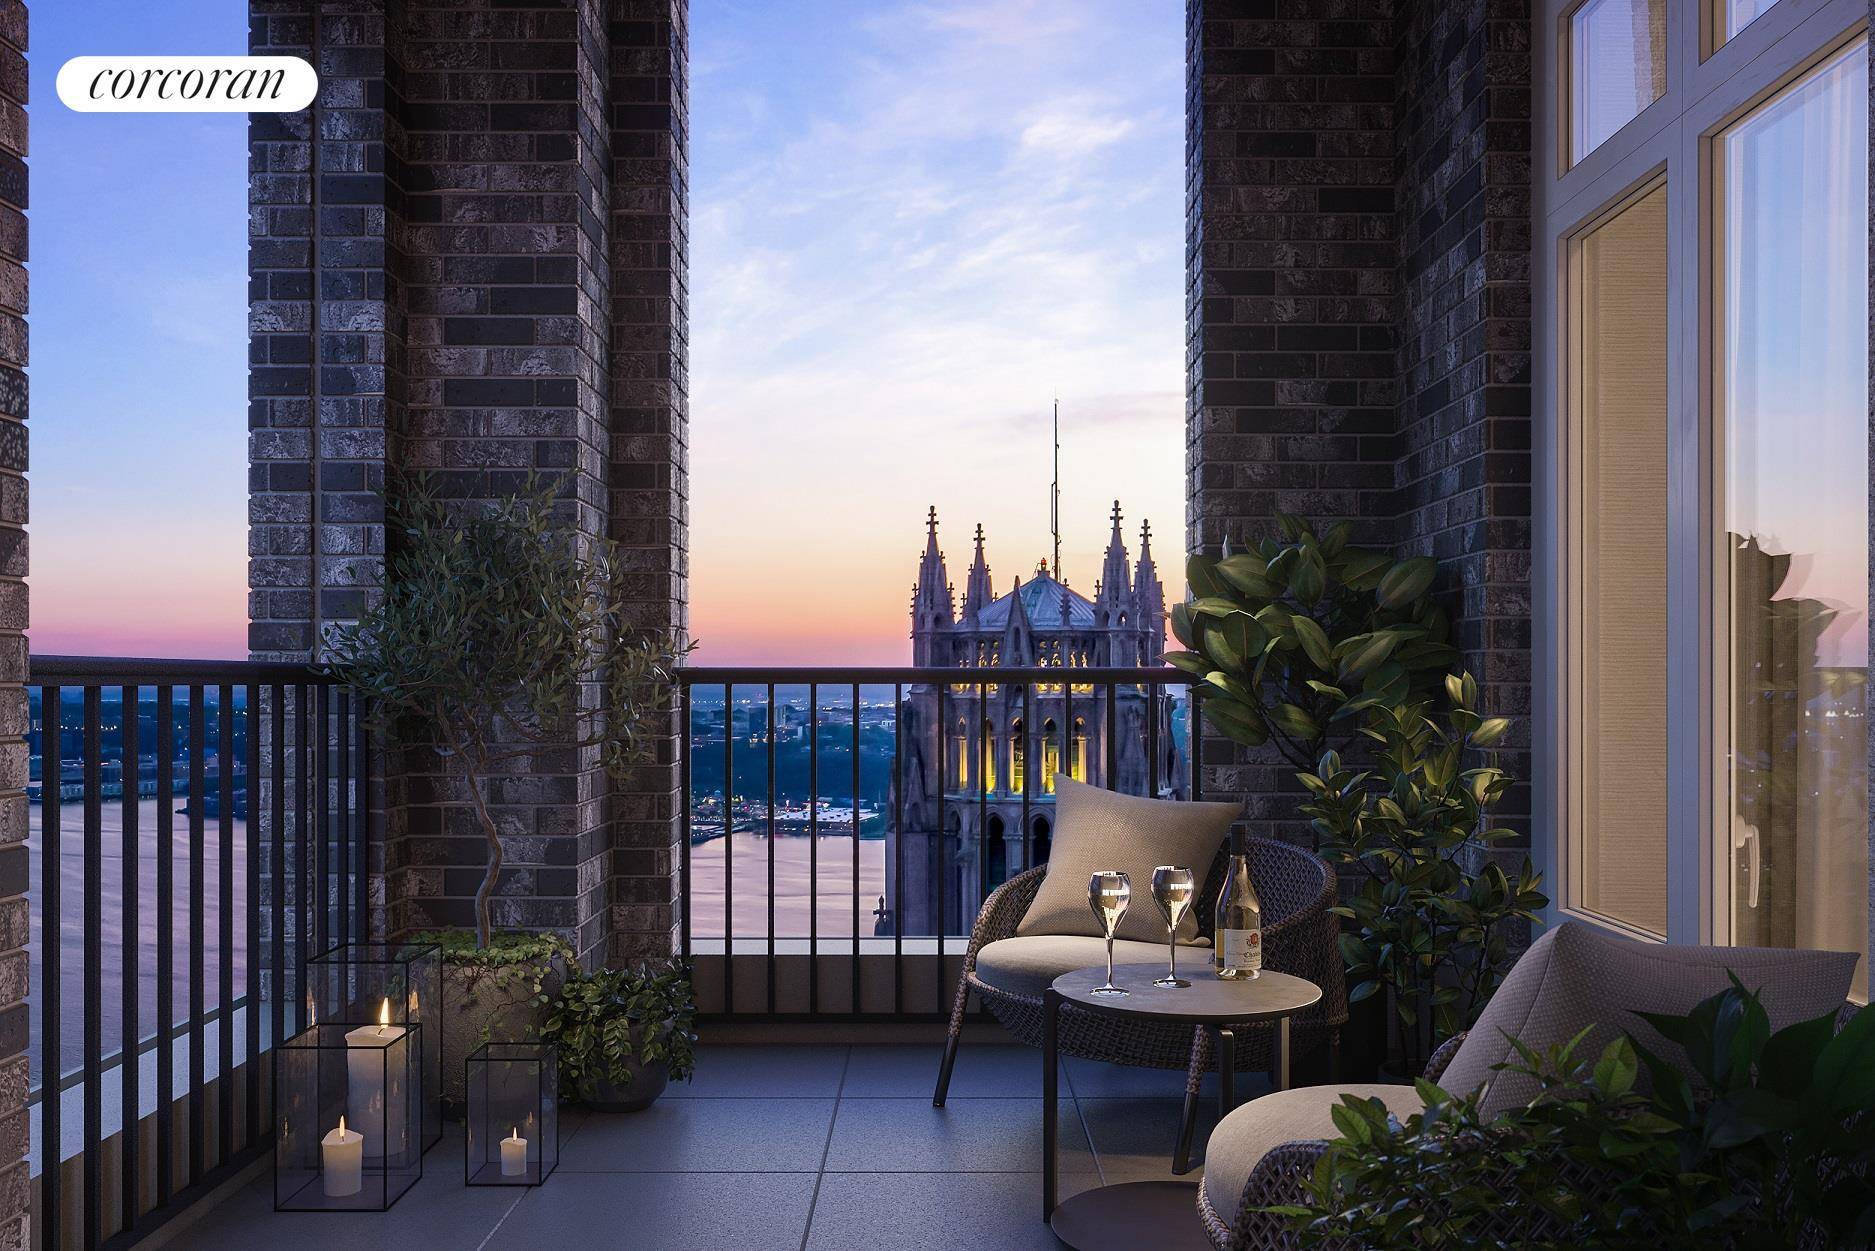 This 3 bedroom, 2 bathroom home with powder room offers sweeping northern and western views over the Hudson River, Riverside and Sakura Parks, and the iconic spire of Riverside Church.